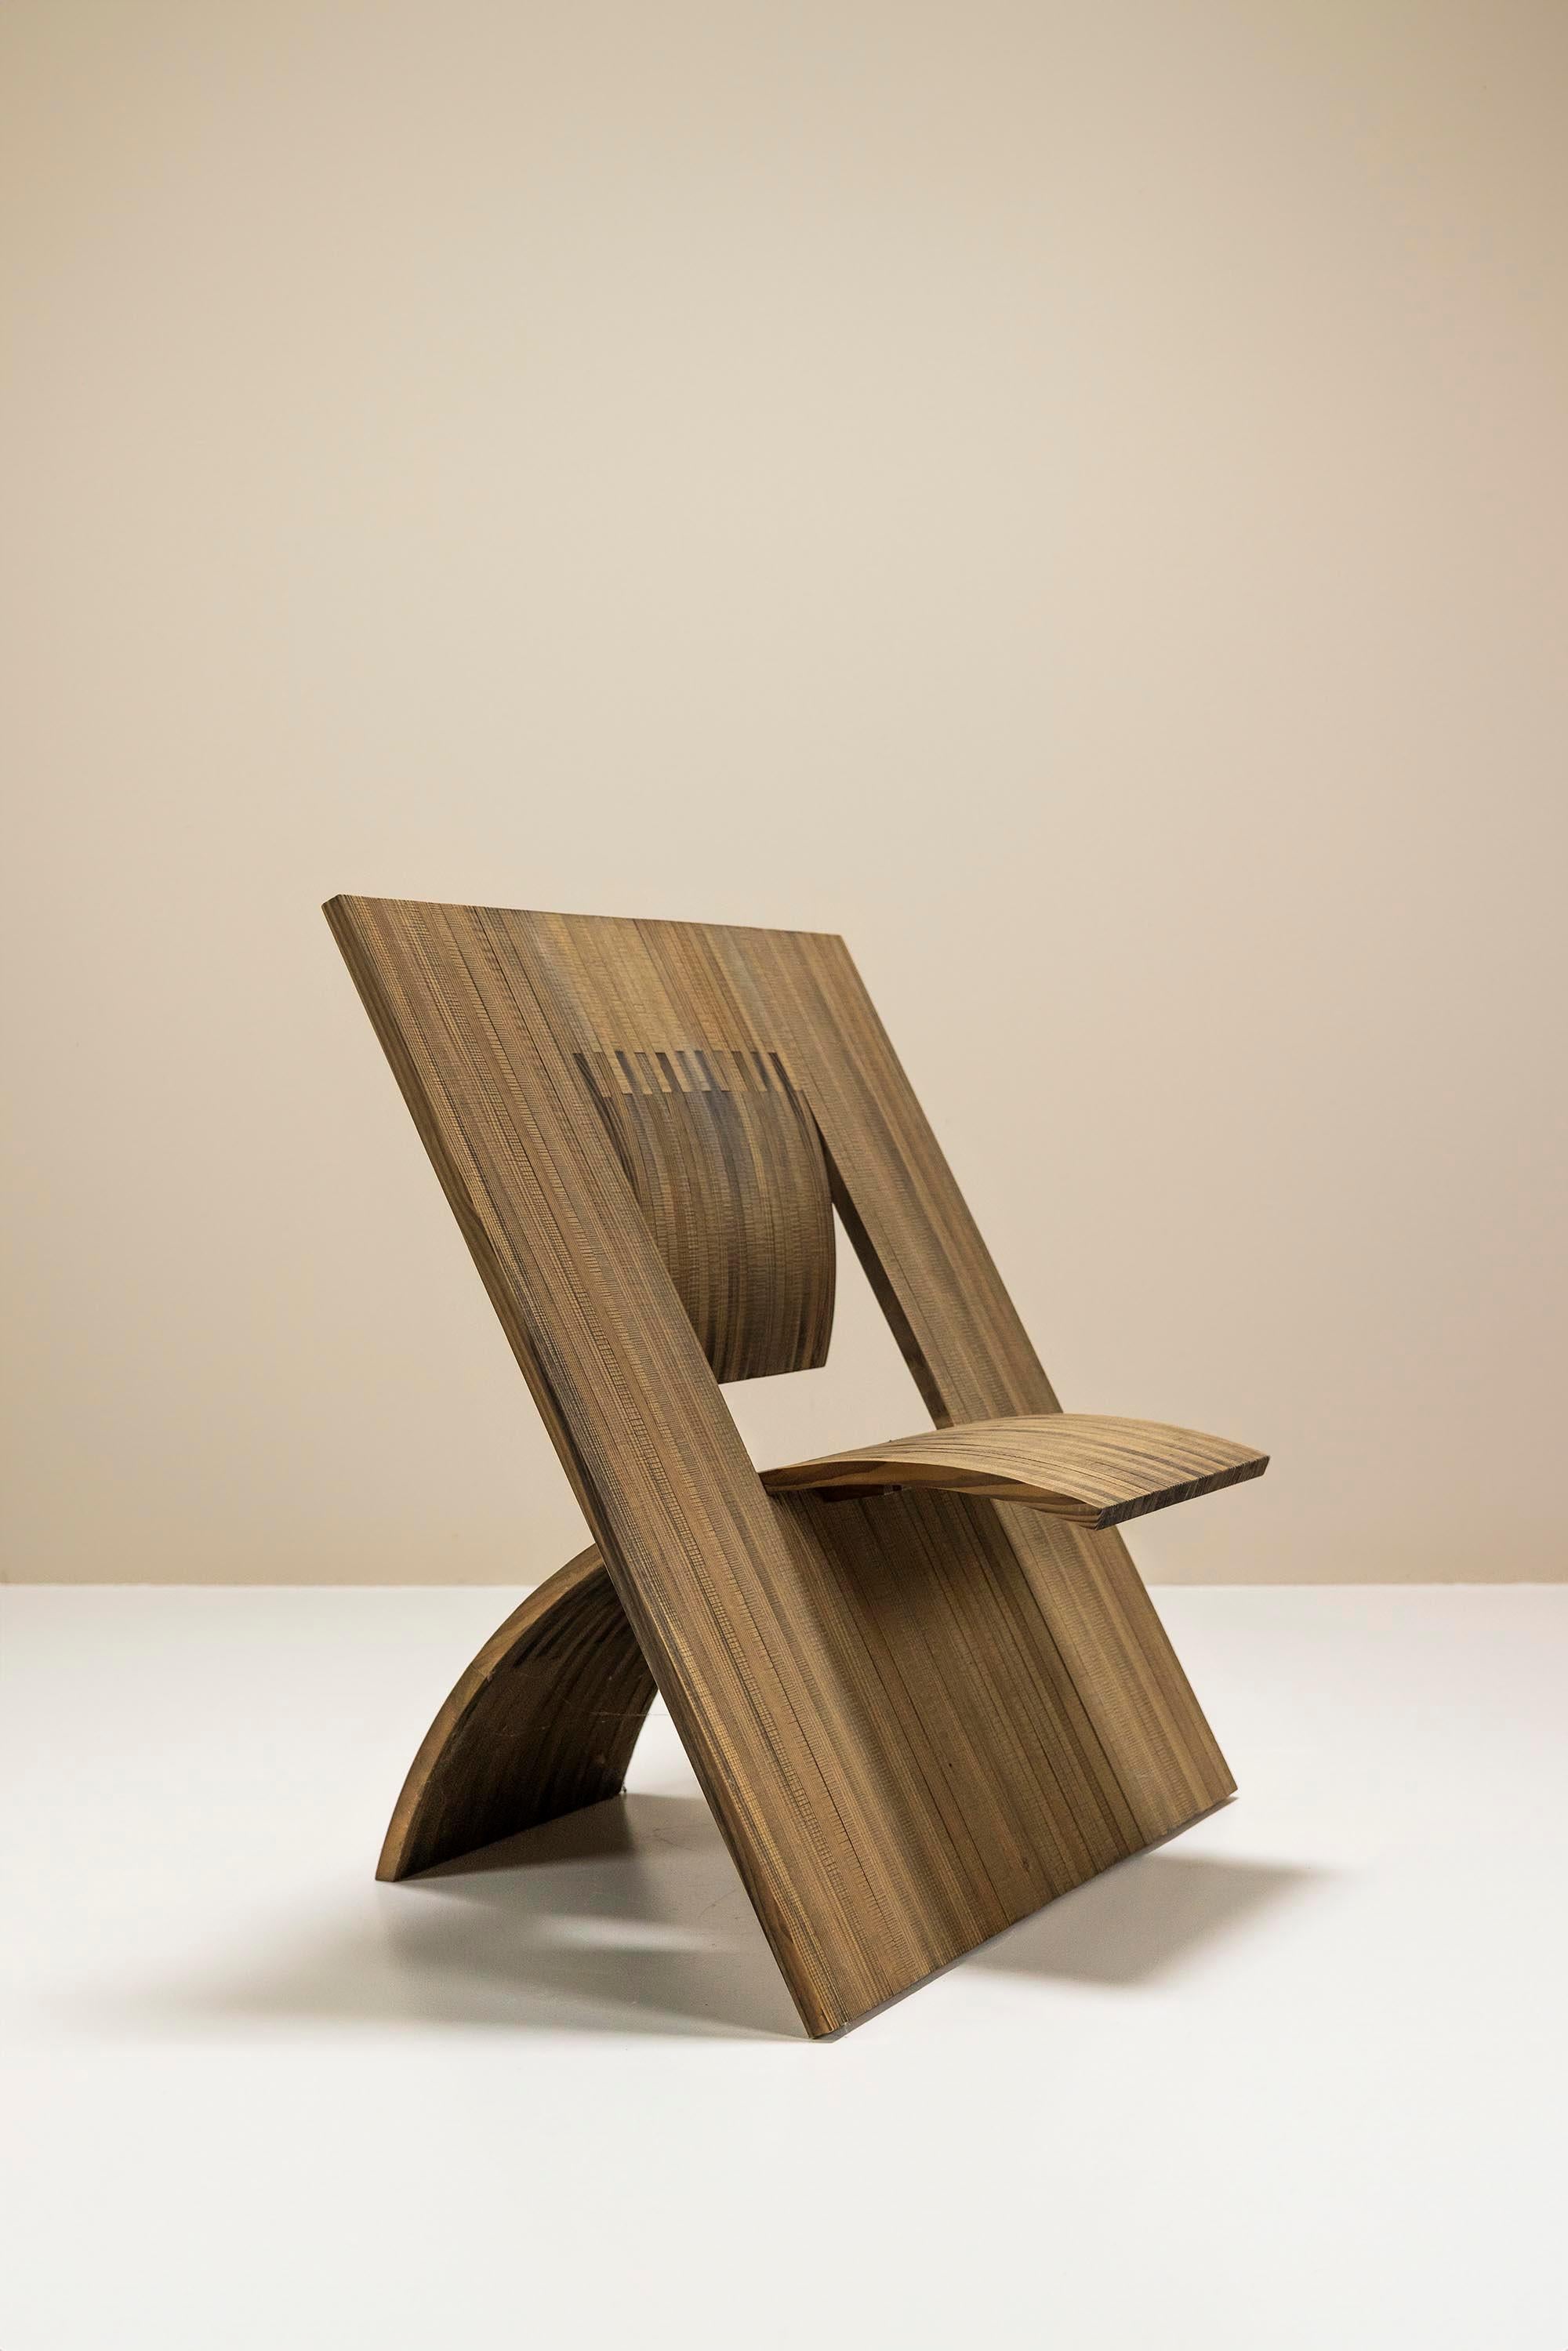 Late 20th Century Deconstructivist Angled Square Chair in Wood, Netherlands 1980s For Sale